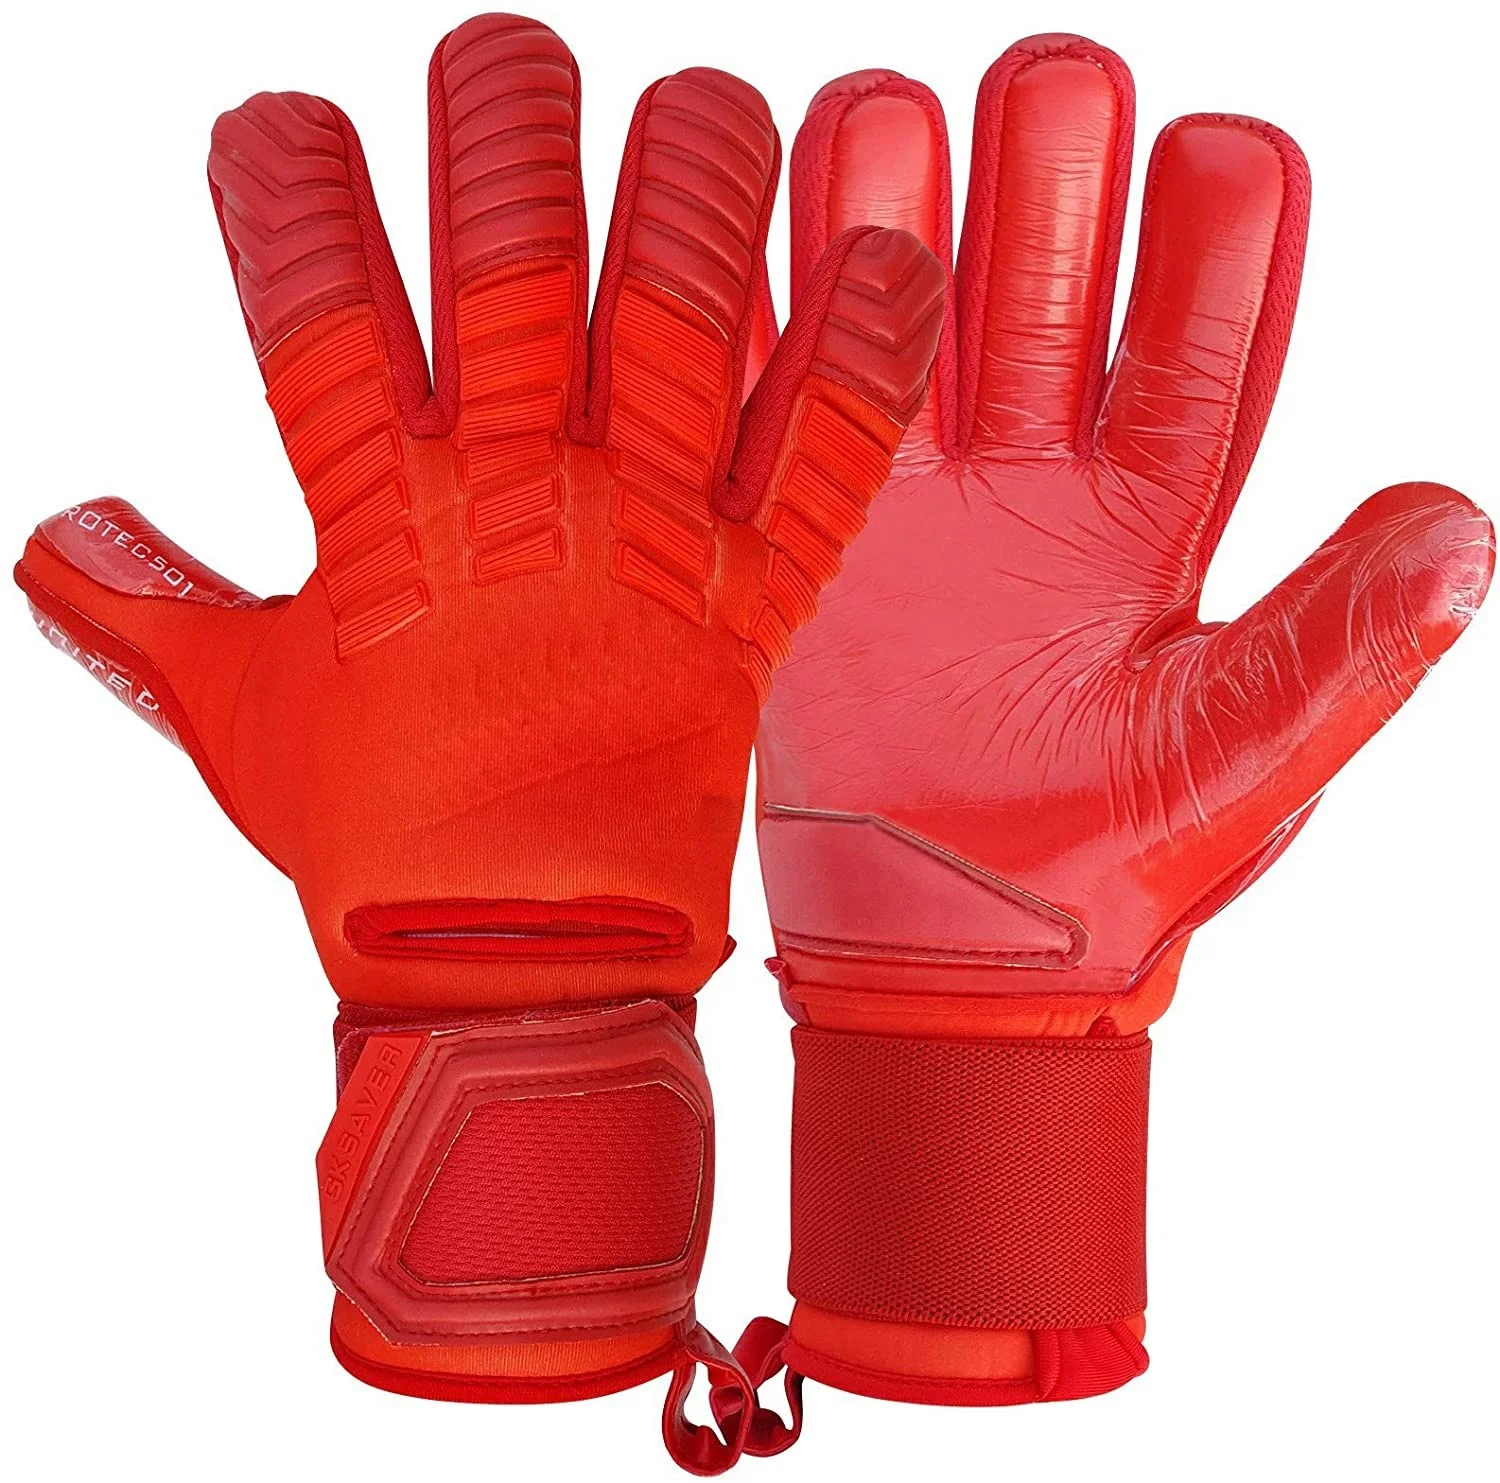 trial price Professional Goalkeeper gloves  sizes 7 and 9